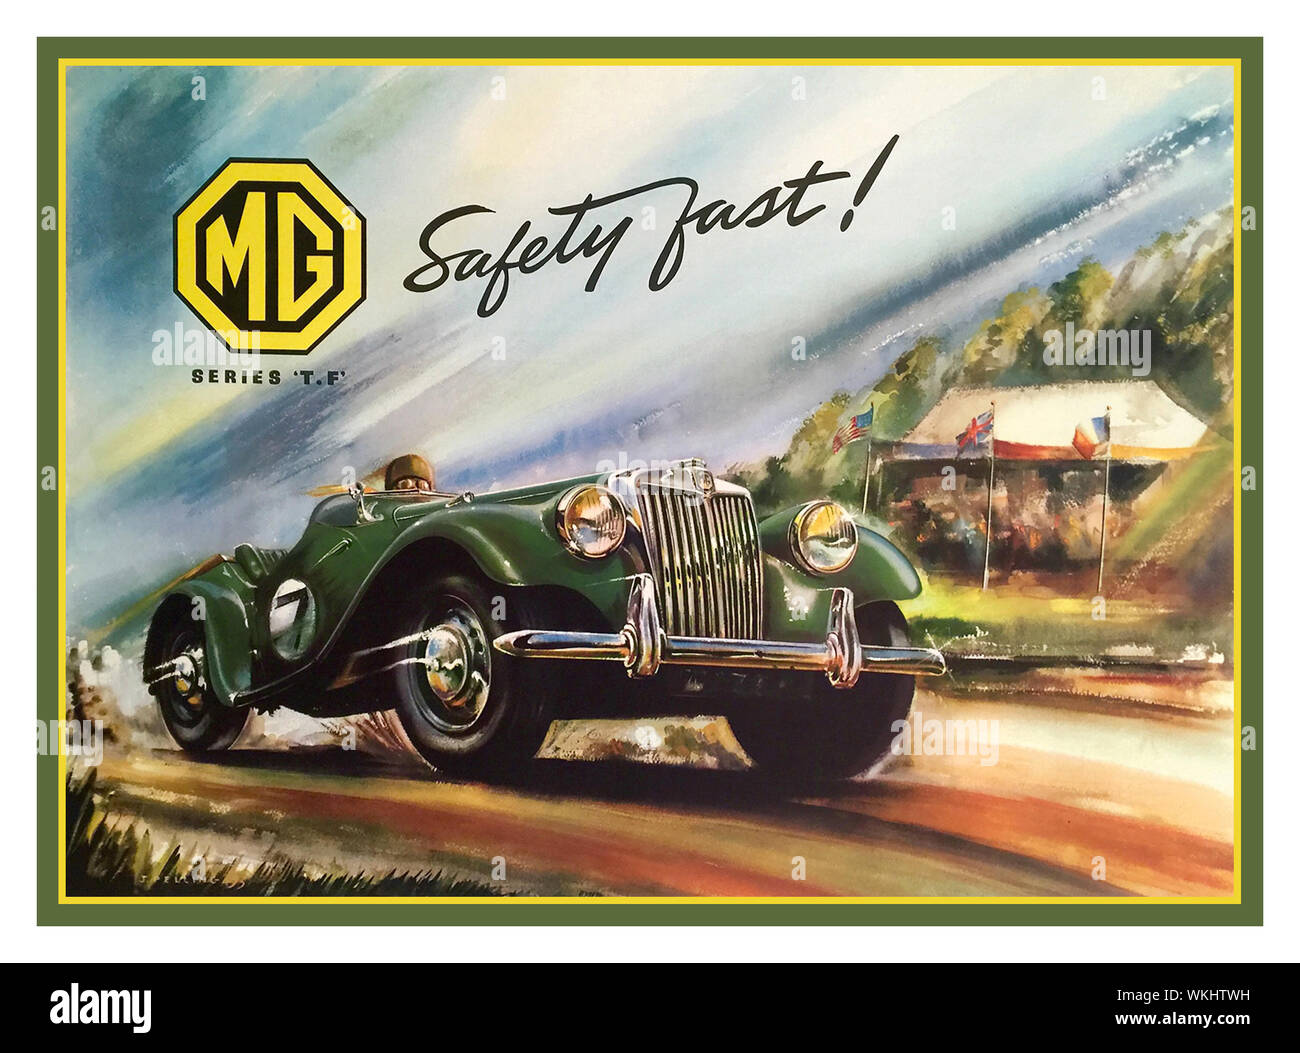 1950’s MG TF British Vintage Sports Car Poster brochure advertising  ‘SAFETY FAST’ by graphic artist Pelling 1953 Stock Photo